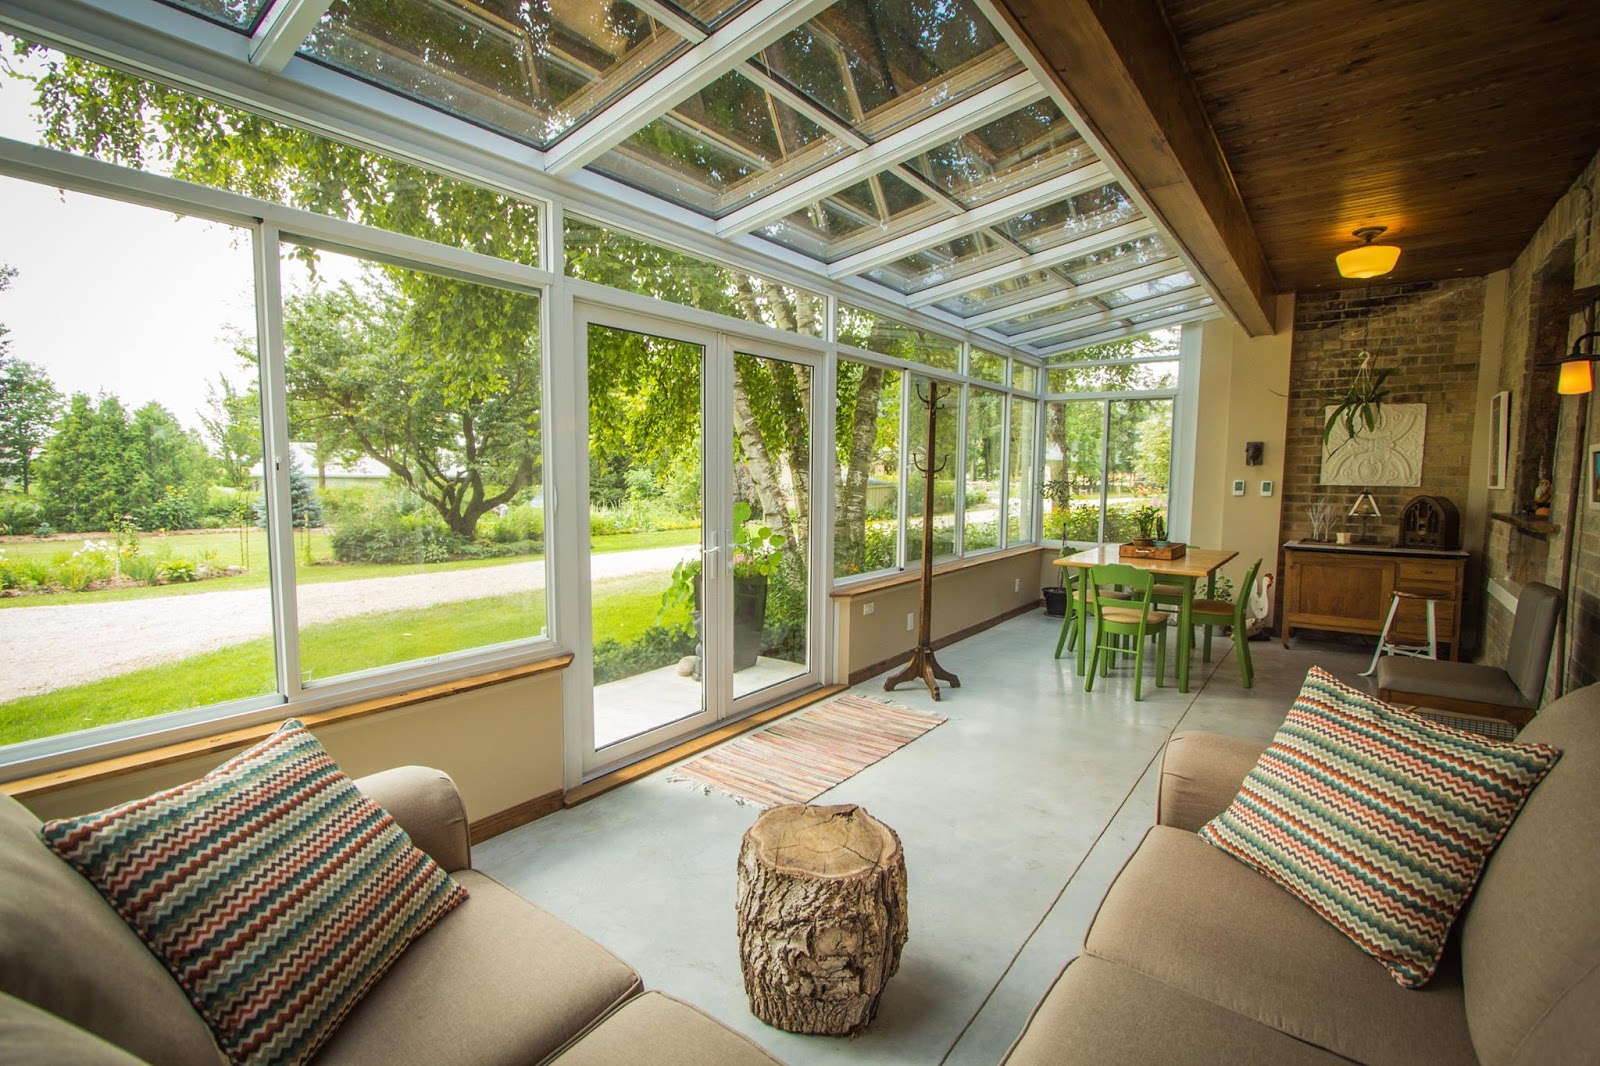 Here Comes The Sun! Why A Sunroom Makes an Ideal Extension To Almost